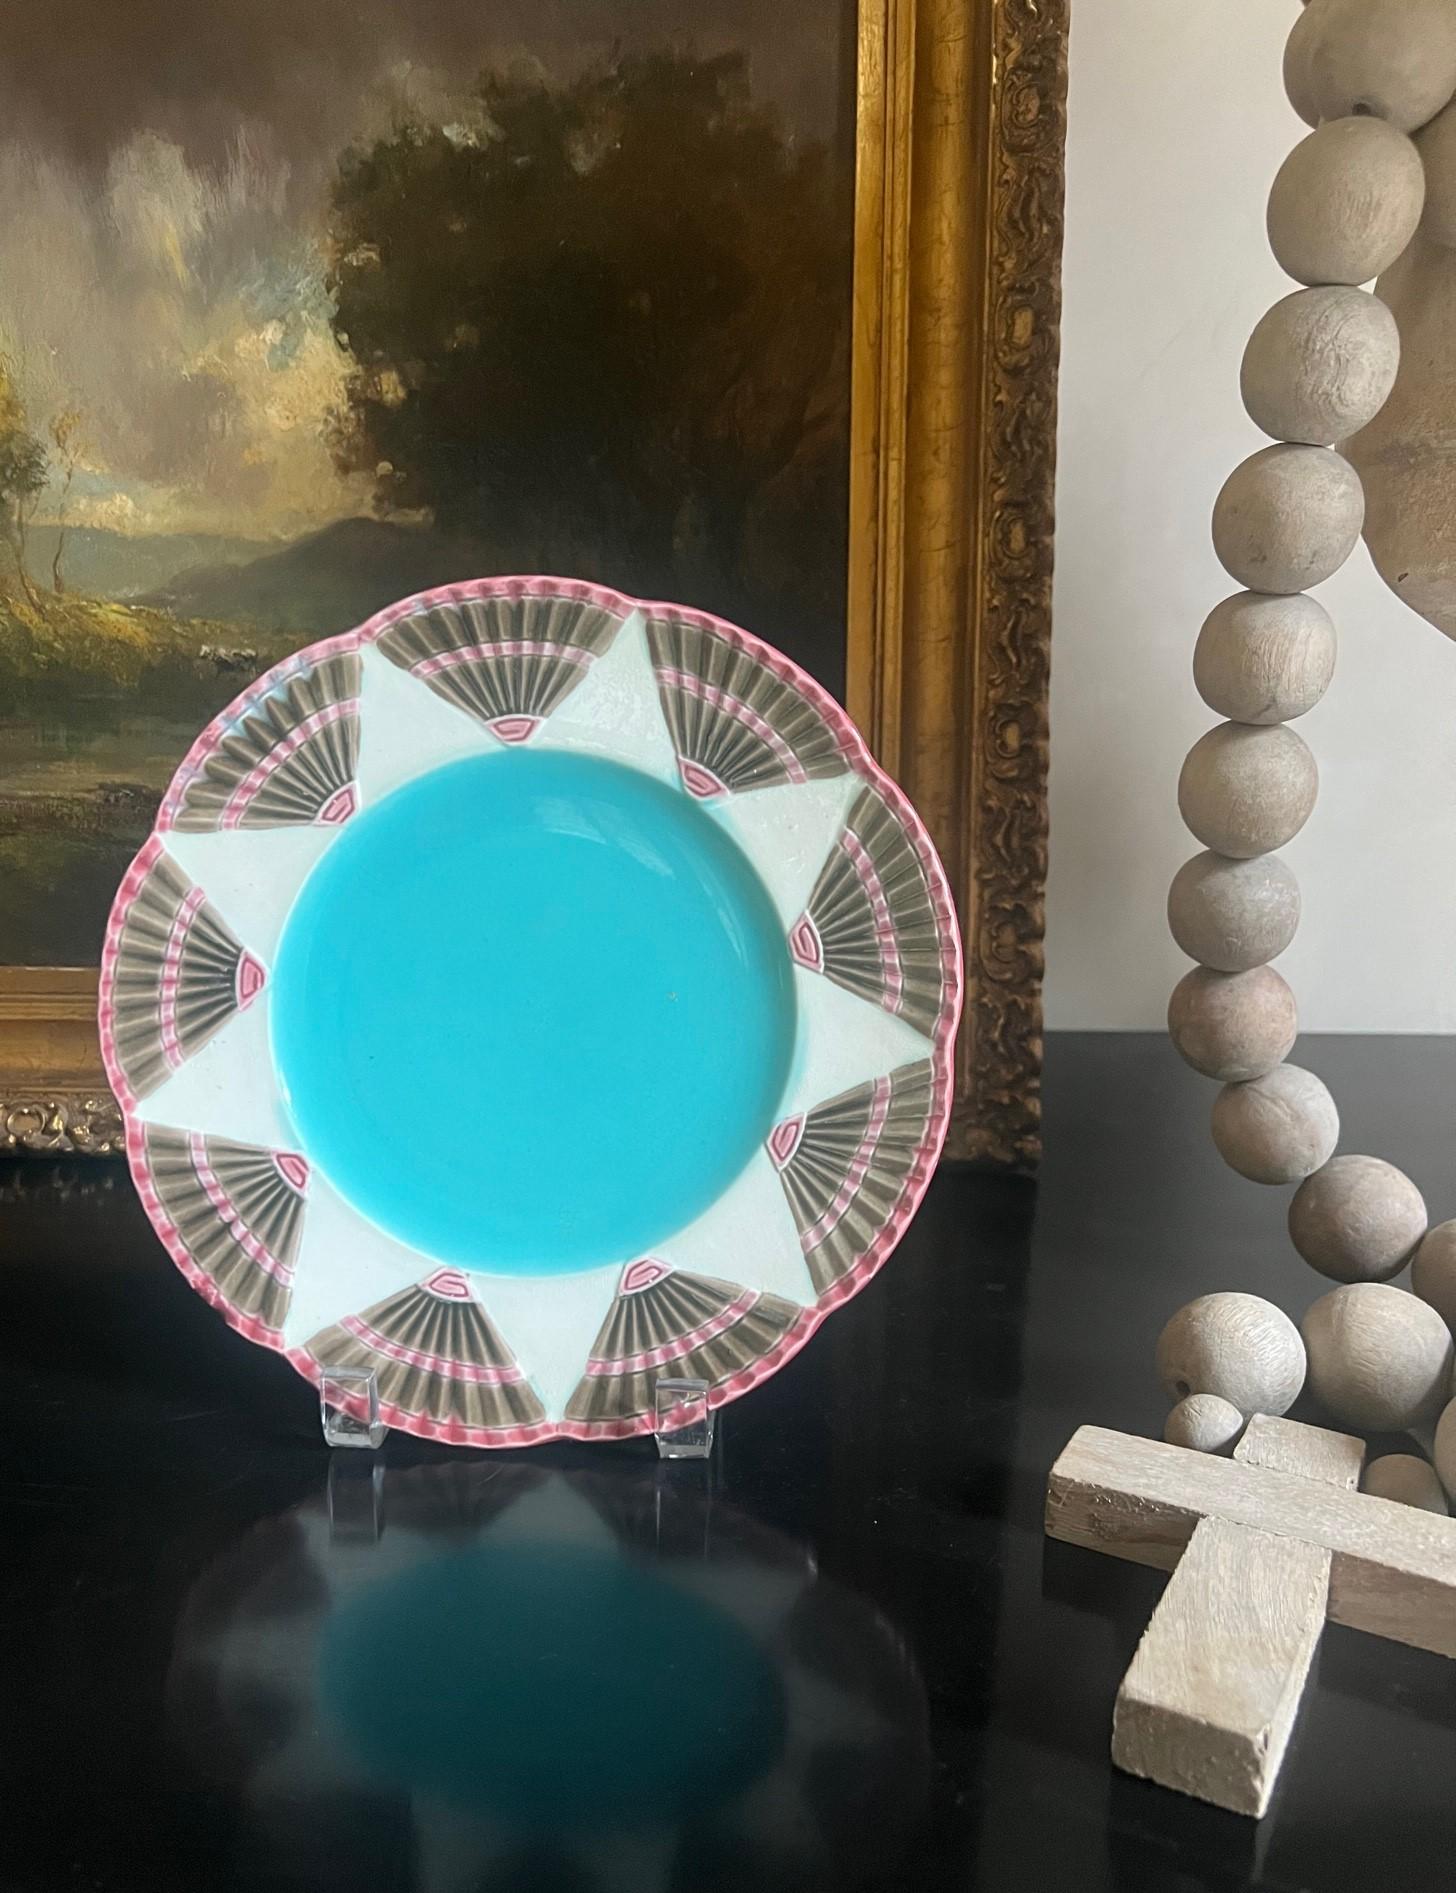 19th Century plate made in England by Wedgwood, the pattern, part of the Fan collection is called Argenta Chicago. It has a turquoise center surrounded by a star pattern and fans. 

In 1879, nineteen years after it first started majolica